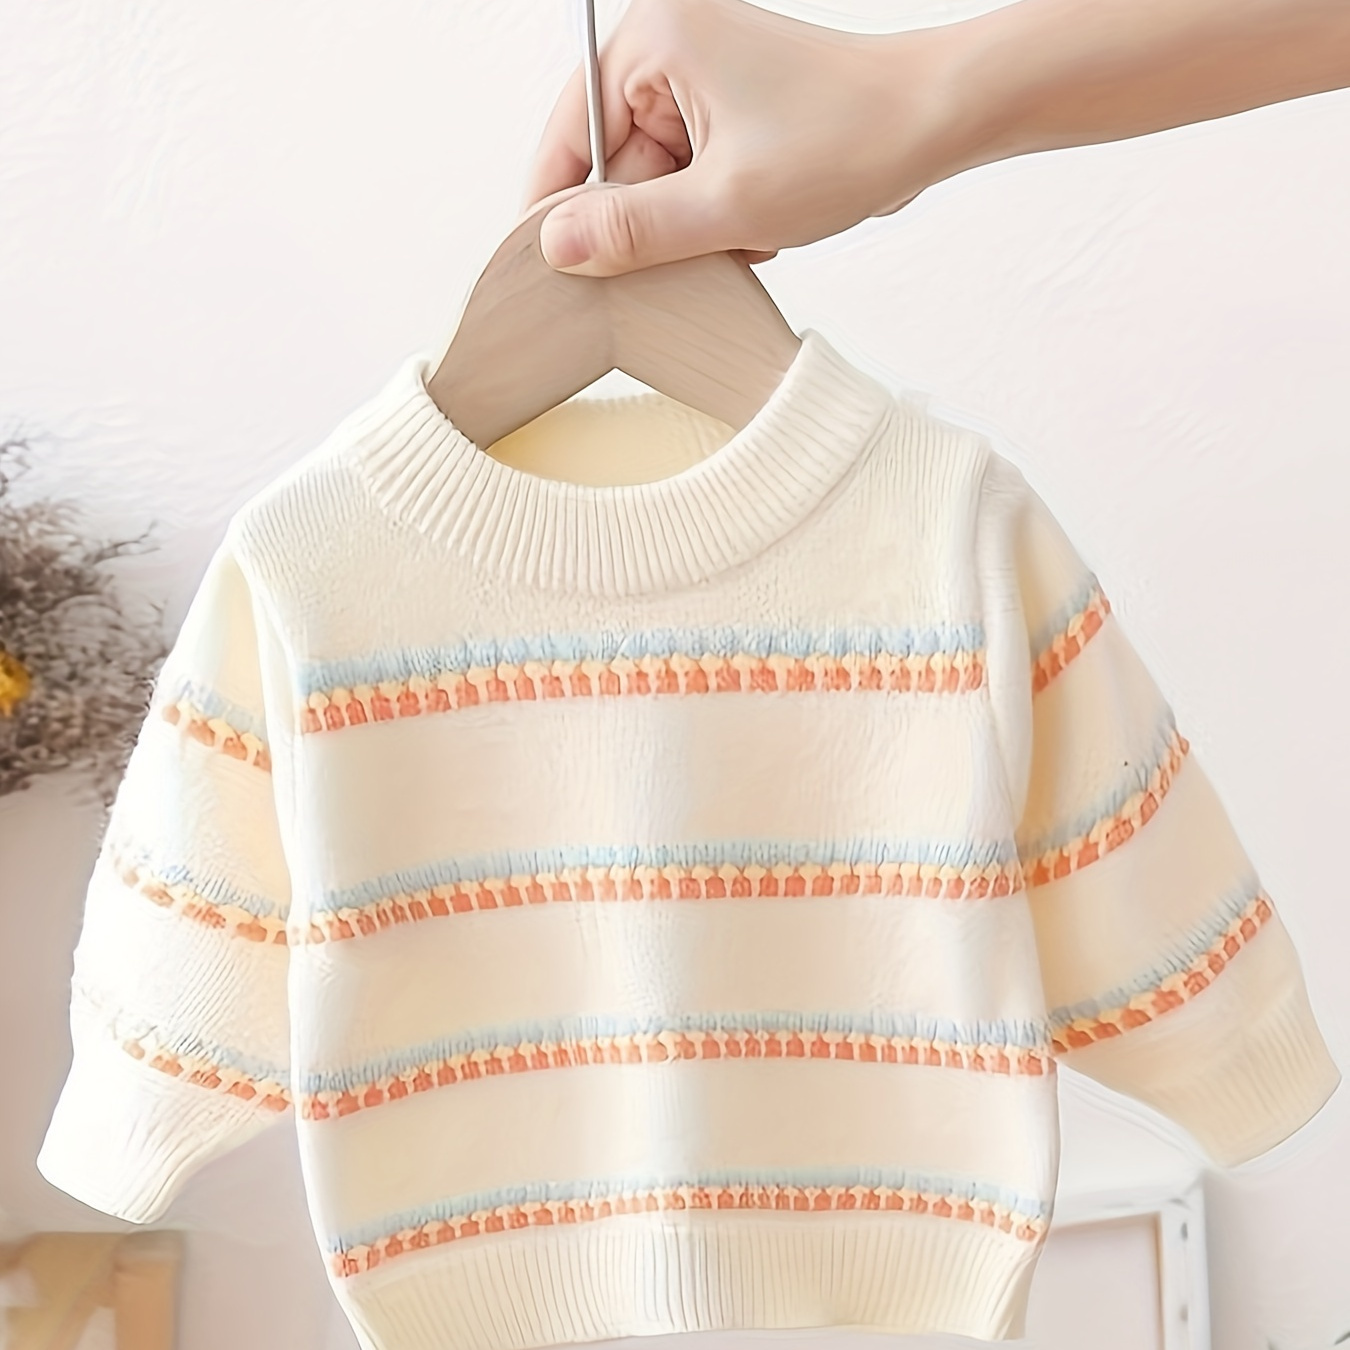 

Baby's Colorful Stripe Pattern Sweater, Casual Cable Knit Long Sleeve Top, Infant & Toddler Girl's Clothing For Fall Winter